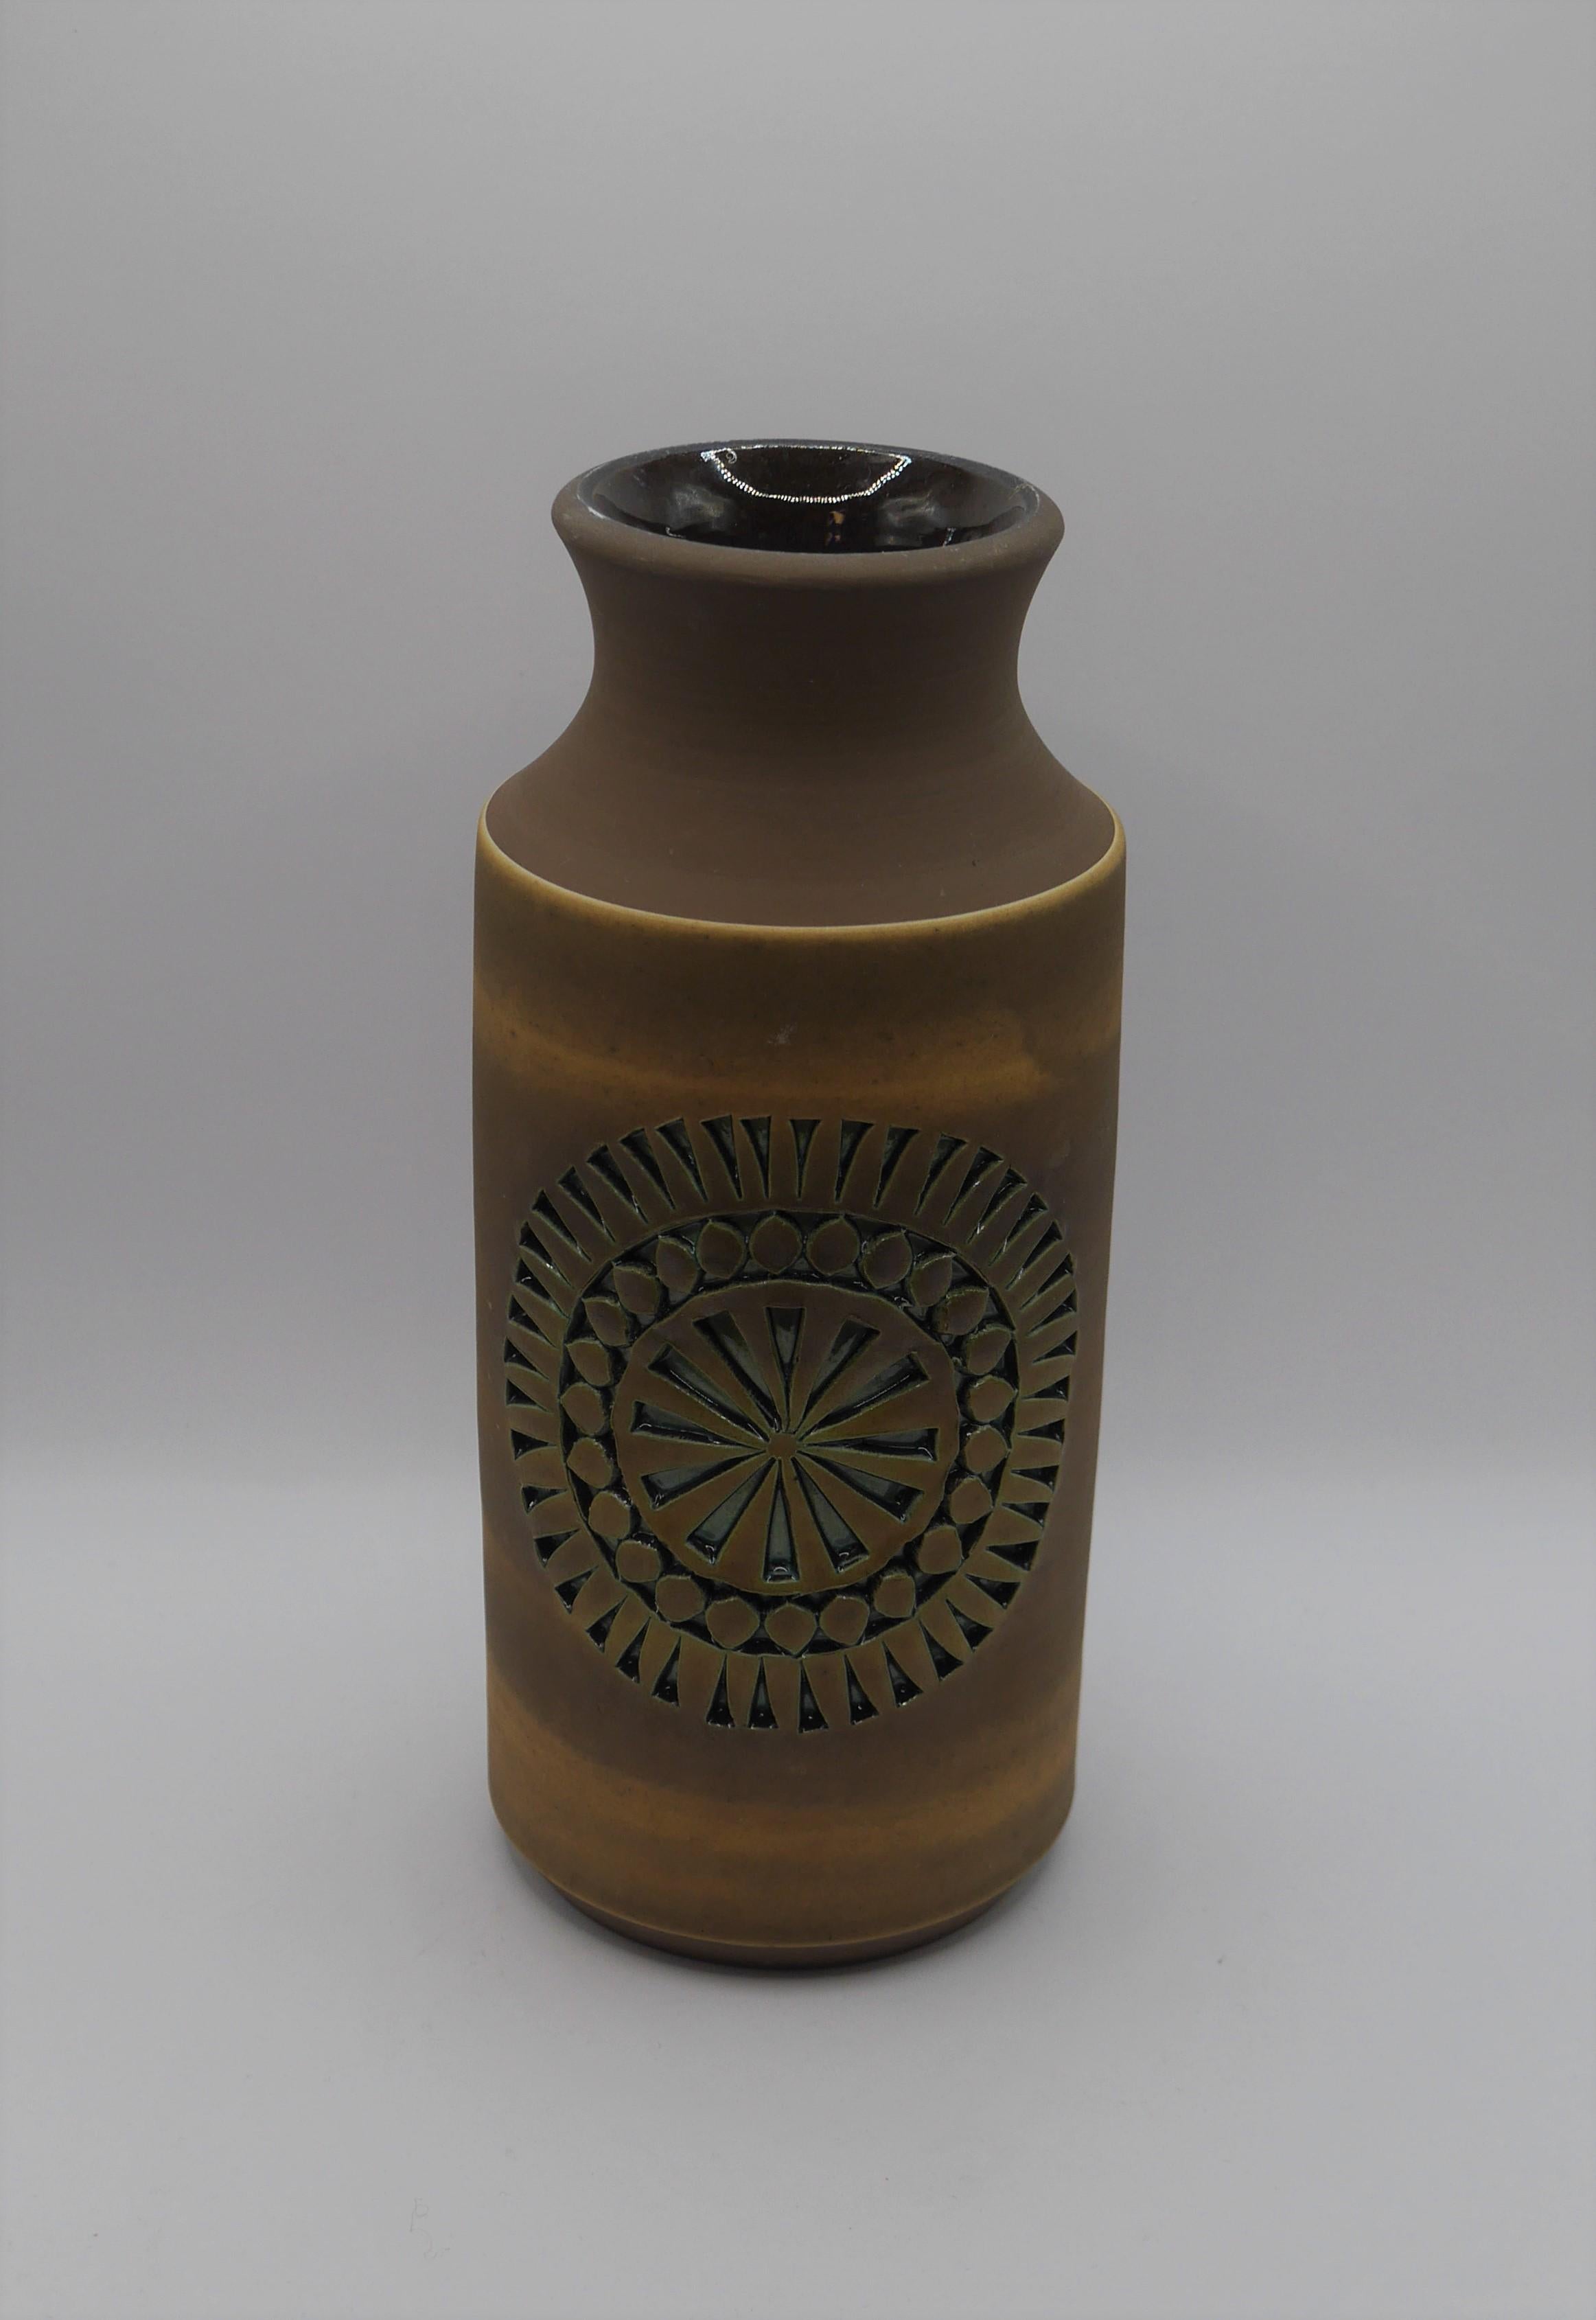 Hand-Crafted Vase from Alingsås, Sweden by Tomas Anagrius